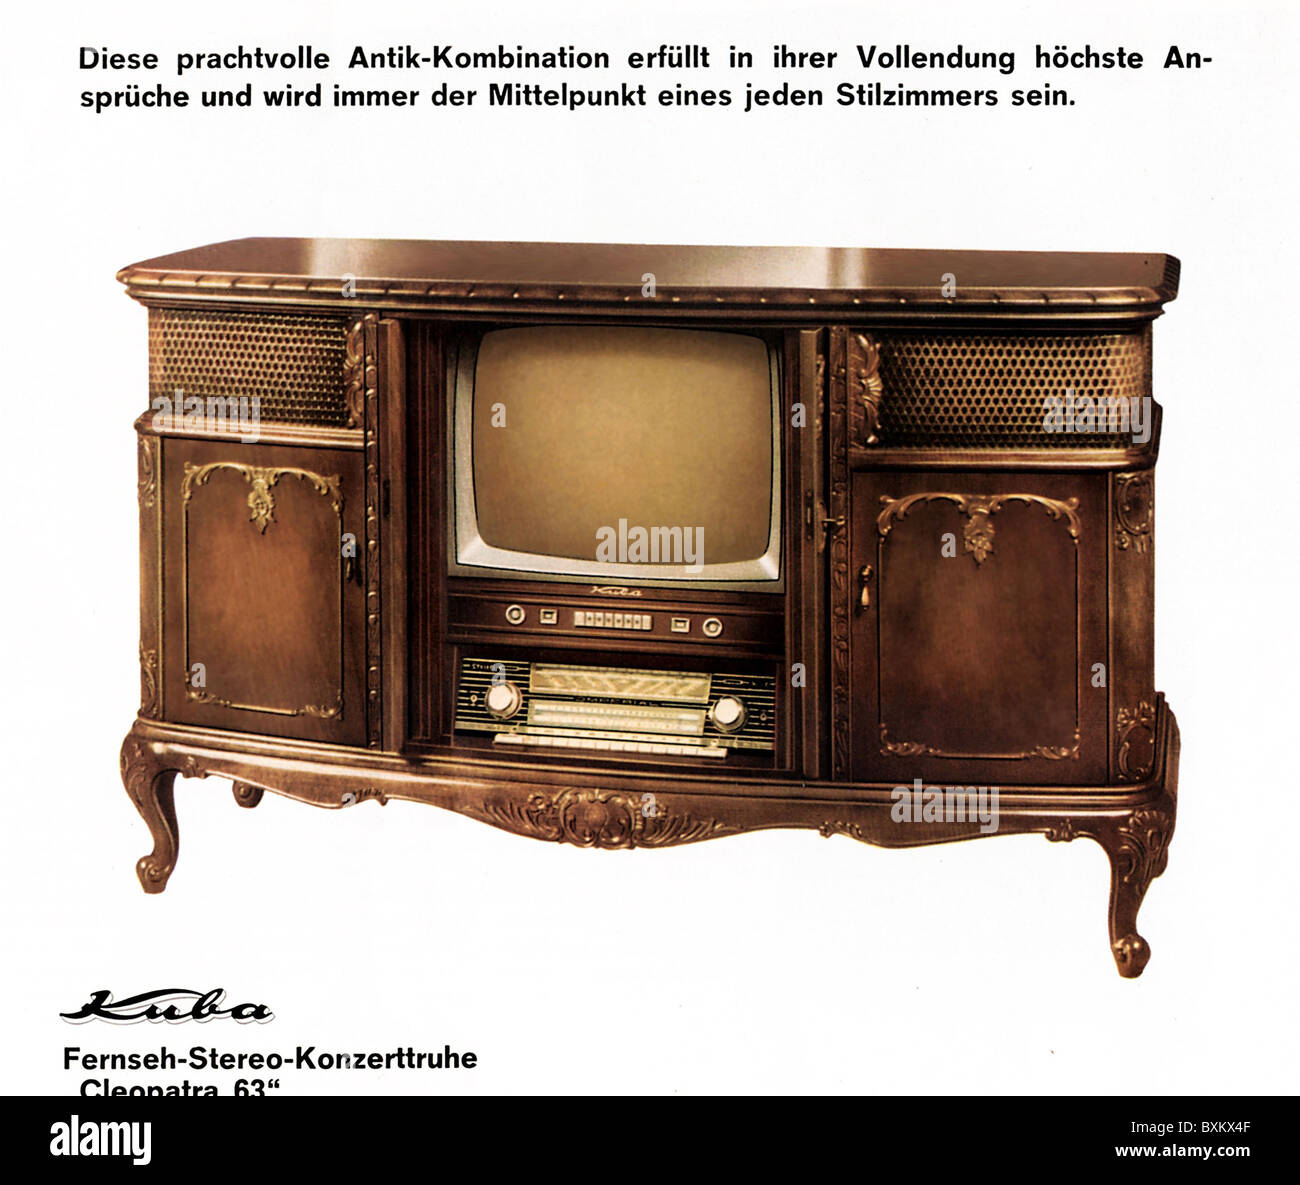 television / broadcast, TV, stereo concert chest 'Kuba Kleopatra 63', Germany, 1962, Additional-Rights-Clearences-Not Available Stock Photo